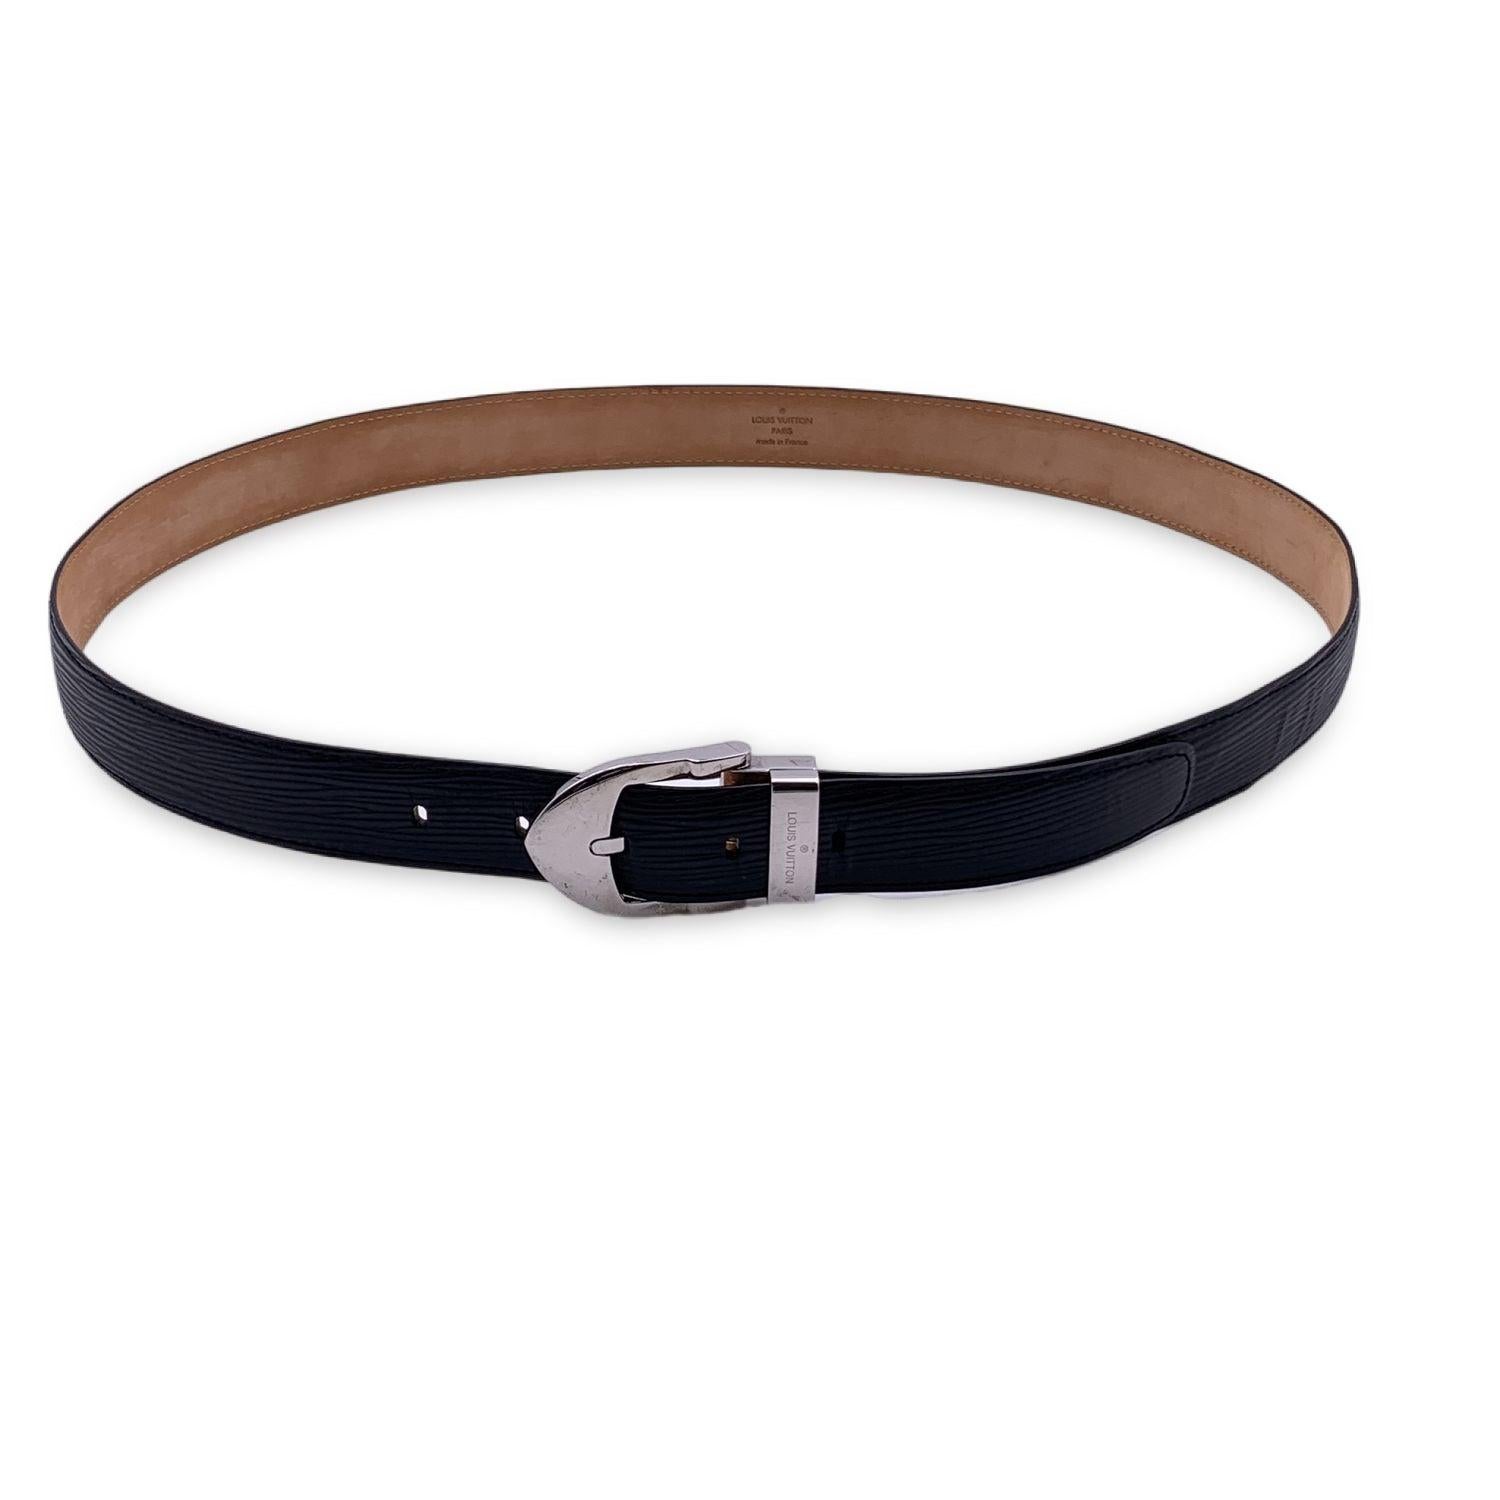 LOUIS VUITTON black epi leather belt. The belt features asilver metal buckle with engraved 'Louis Vuitton' signature. Five holes adjustment. Size 110/44. Width: 1.1 inches - 2.5 cm. Total length: 48 inches - 122 cm (only leather). From first notch